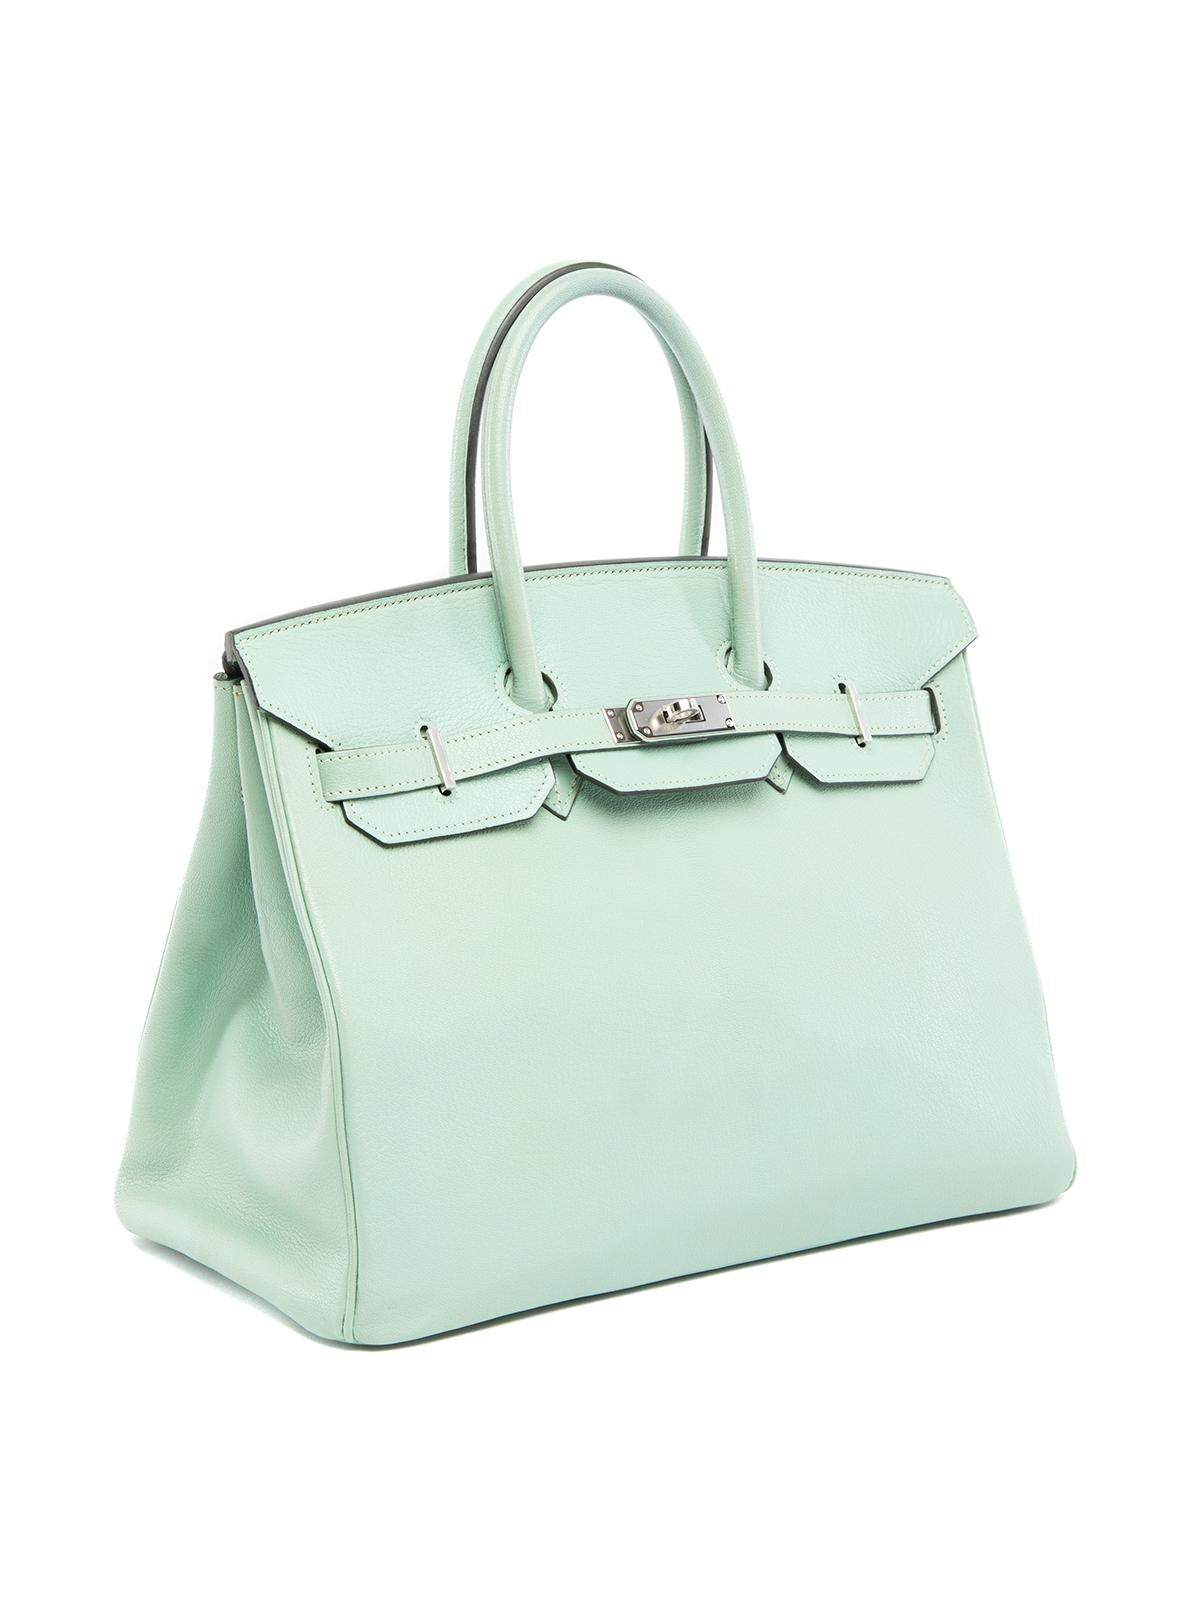 CONDITION is Very good. Minimal wear to bag is evident. Slightly visible marks to exterior. Original dustbag and raincover included. Service receipt also included with this used Hermès designer resale item. Details Colour - Turquoise Material -